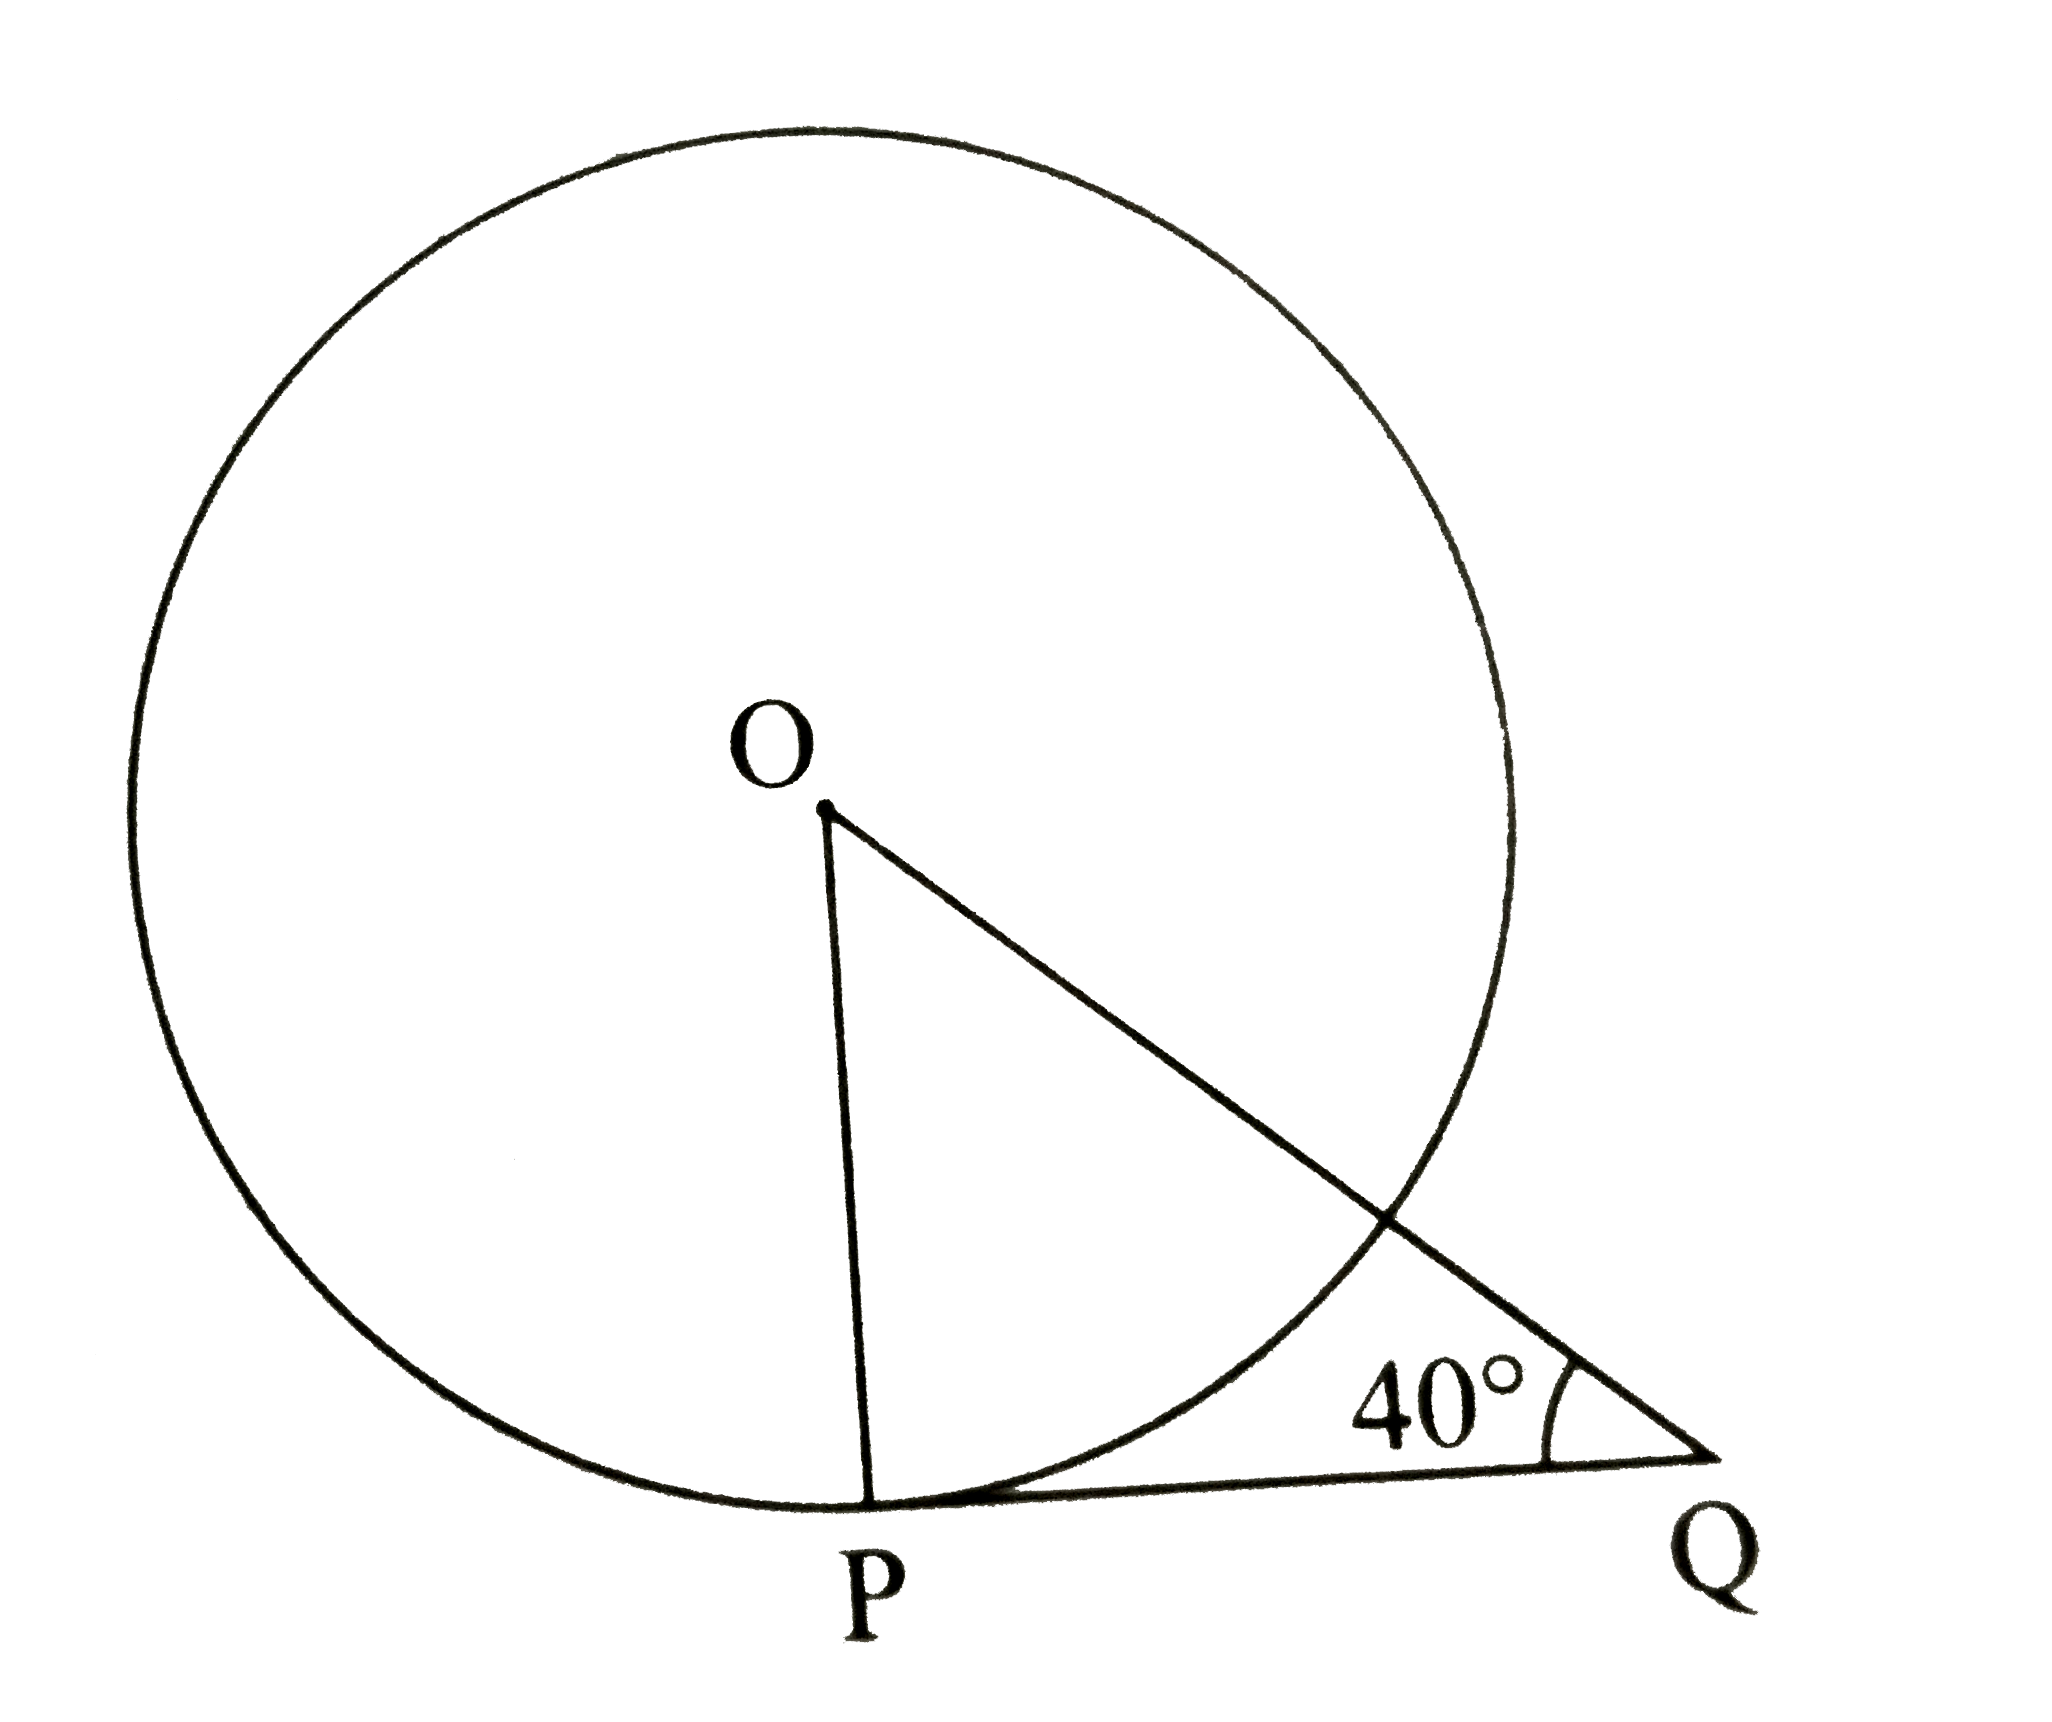 In the figure, seg PQ is tangent OP is the radius, /OQP = 40^(@) , then the measure of / OPQ  is